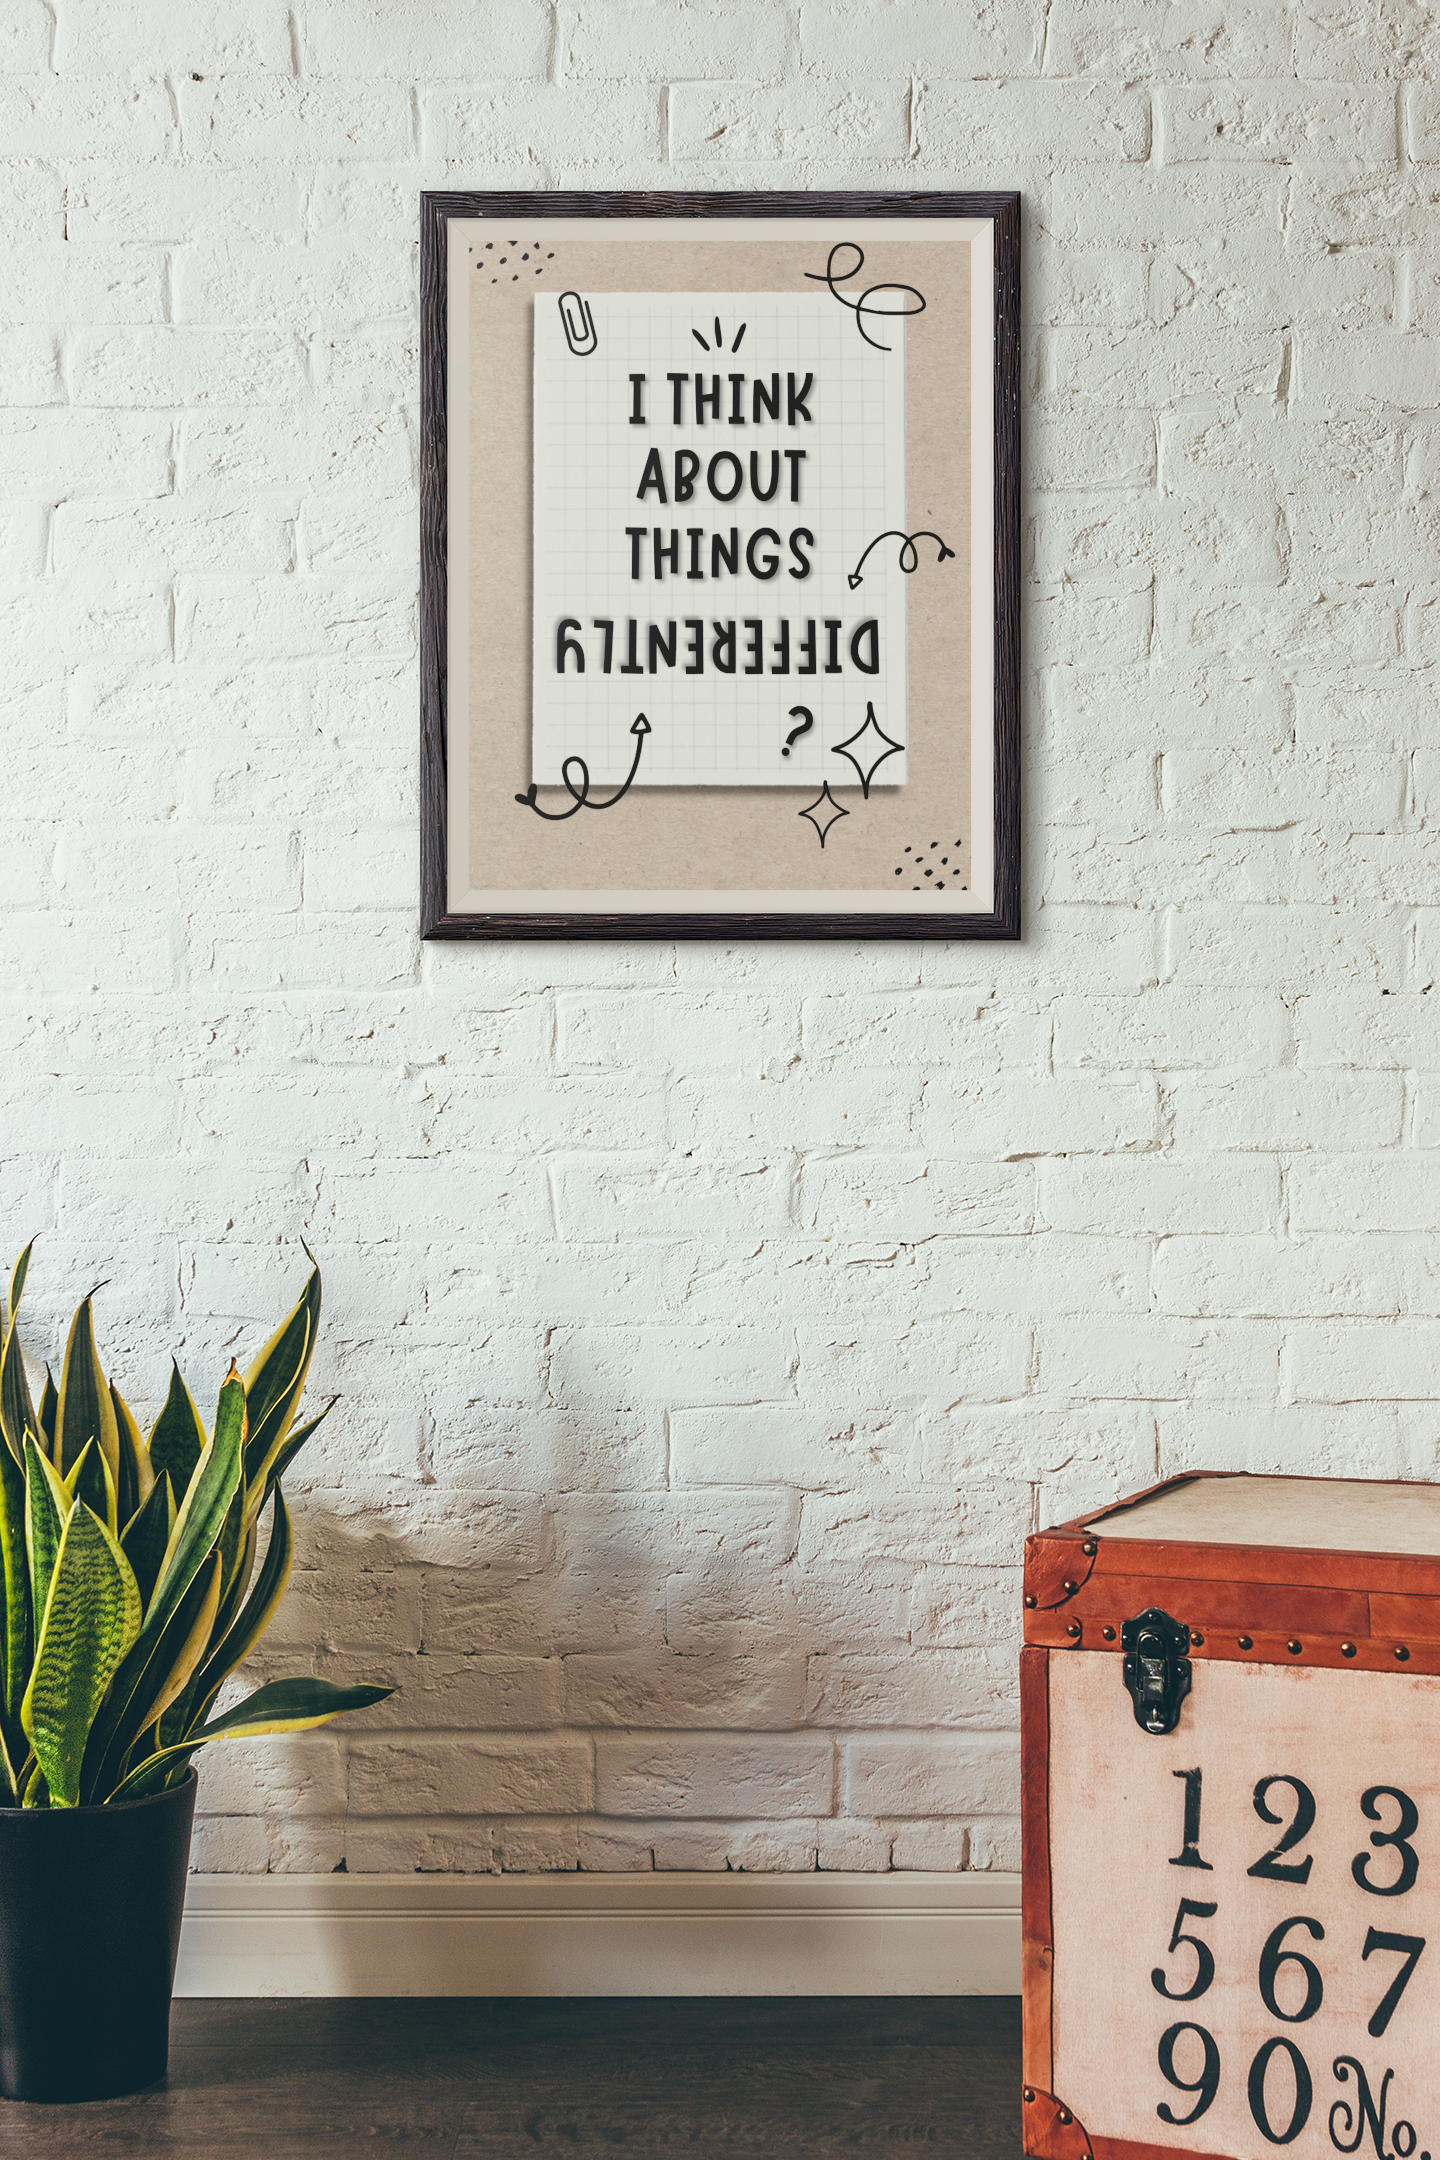 BEING DIFFERENT - QUIRKY, UNIQUE WALL ART - A Poster in FAWN tones about you!